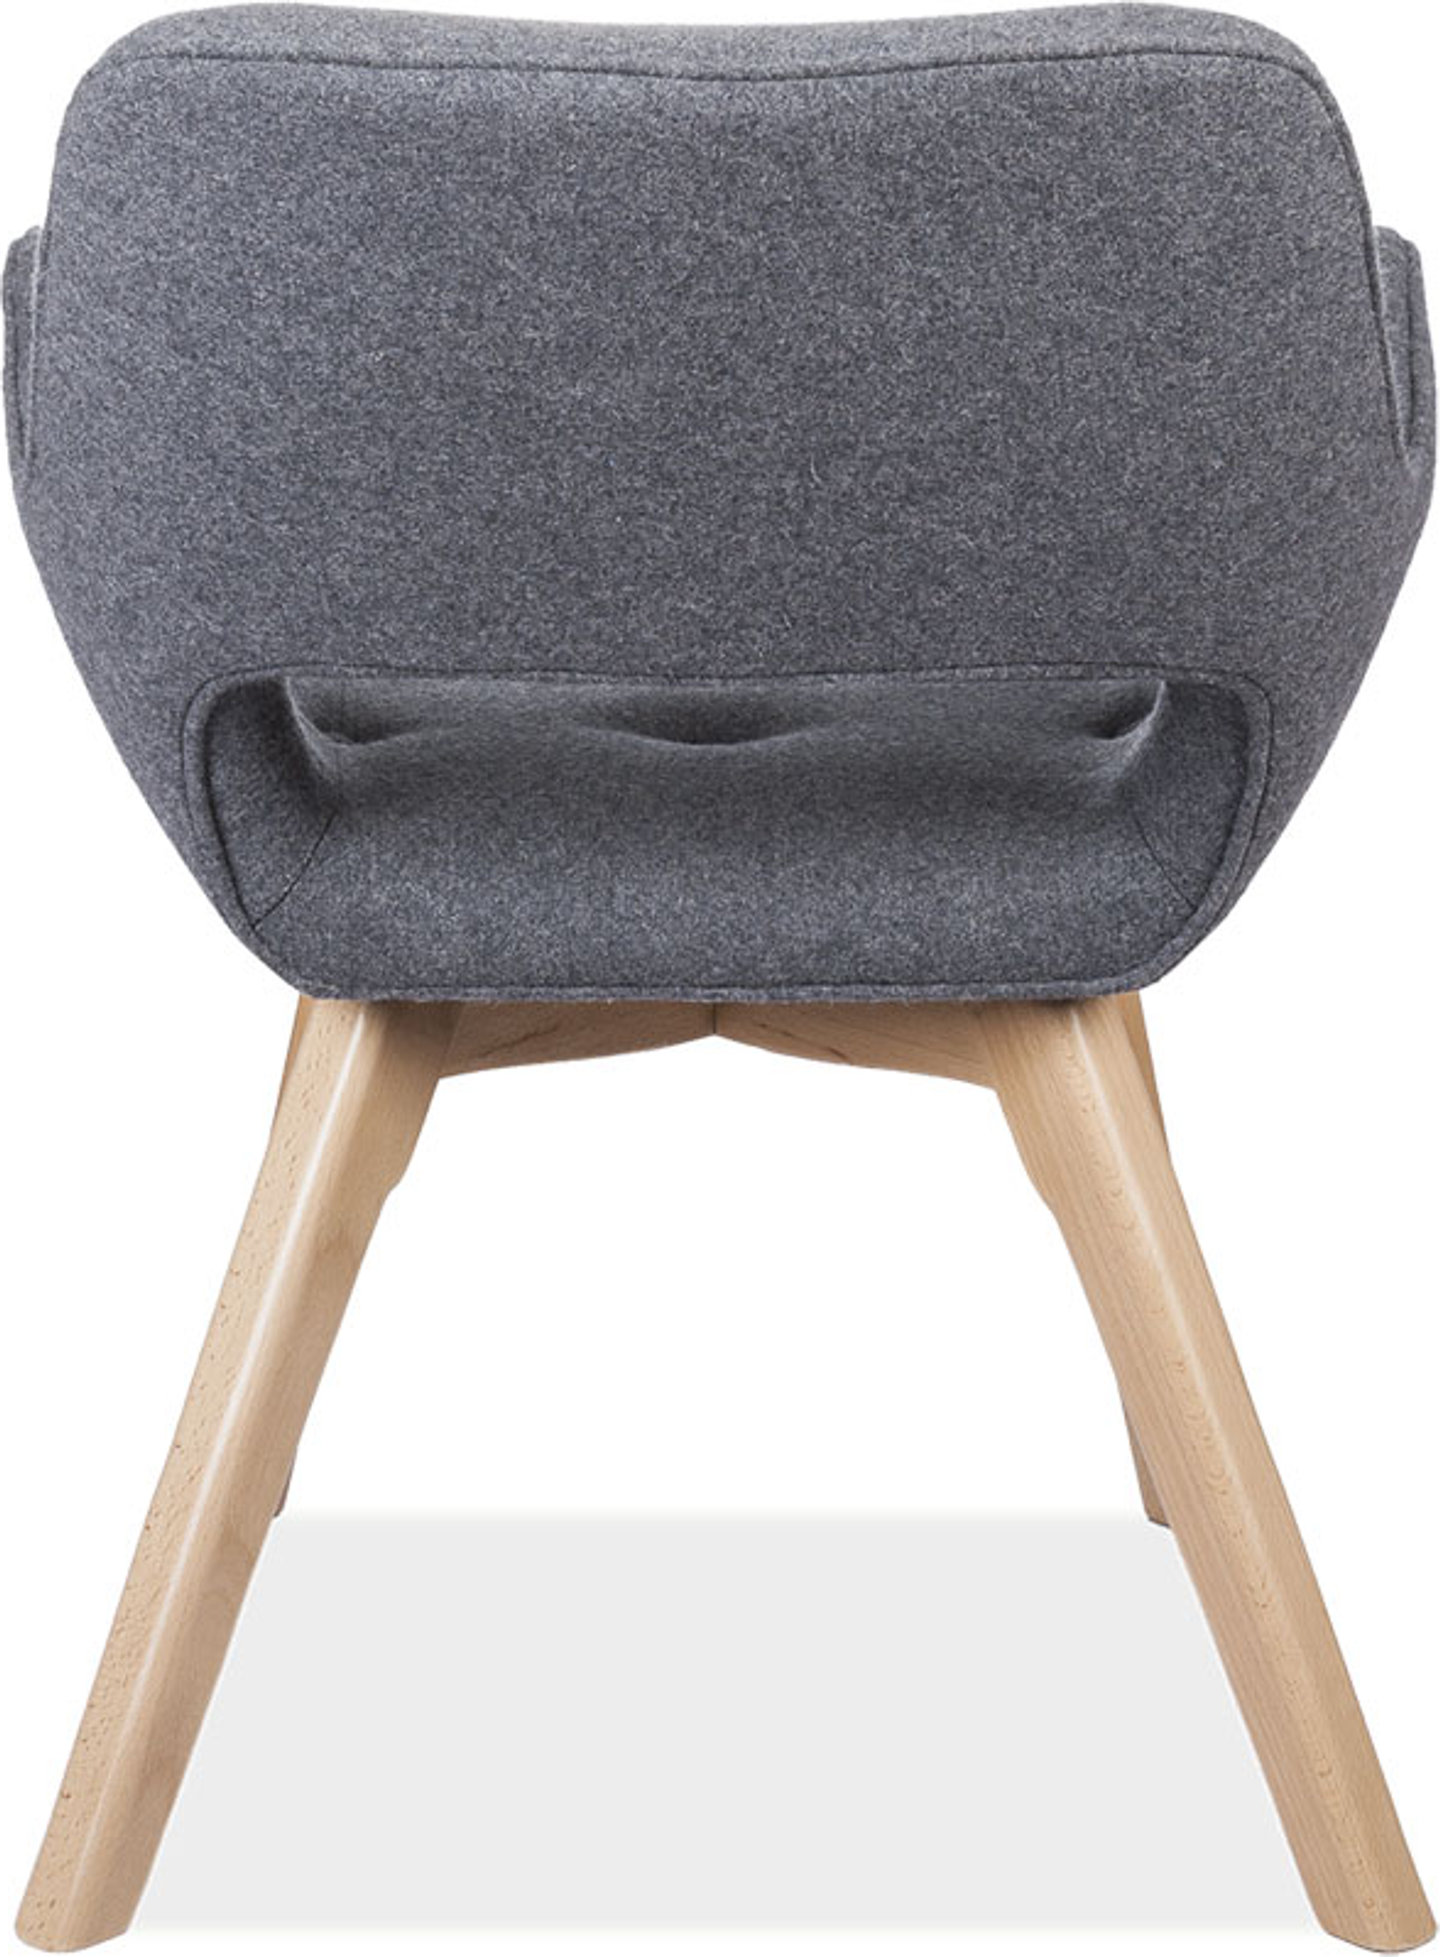 Fabric Dining Chair Grey image.